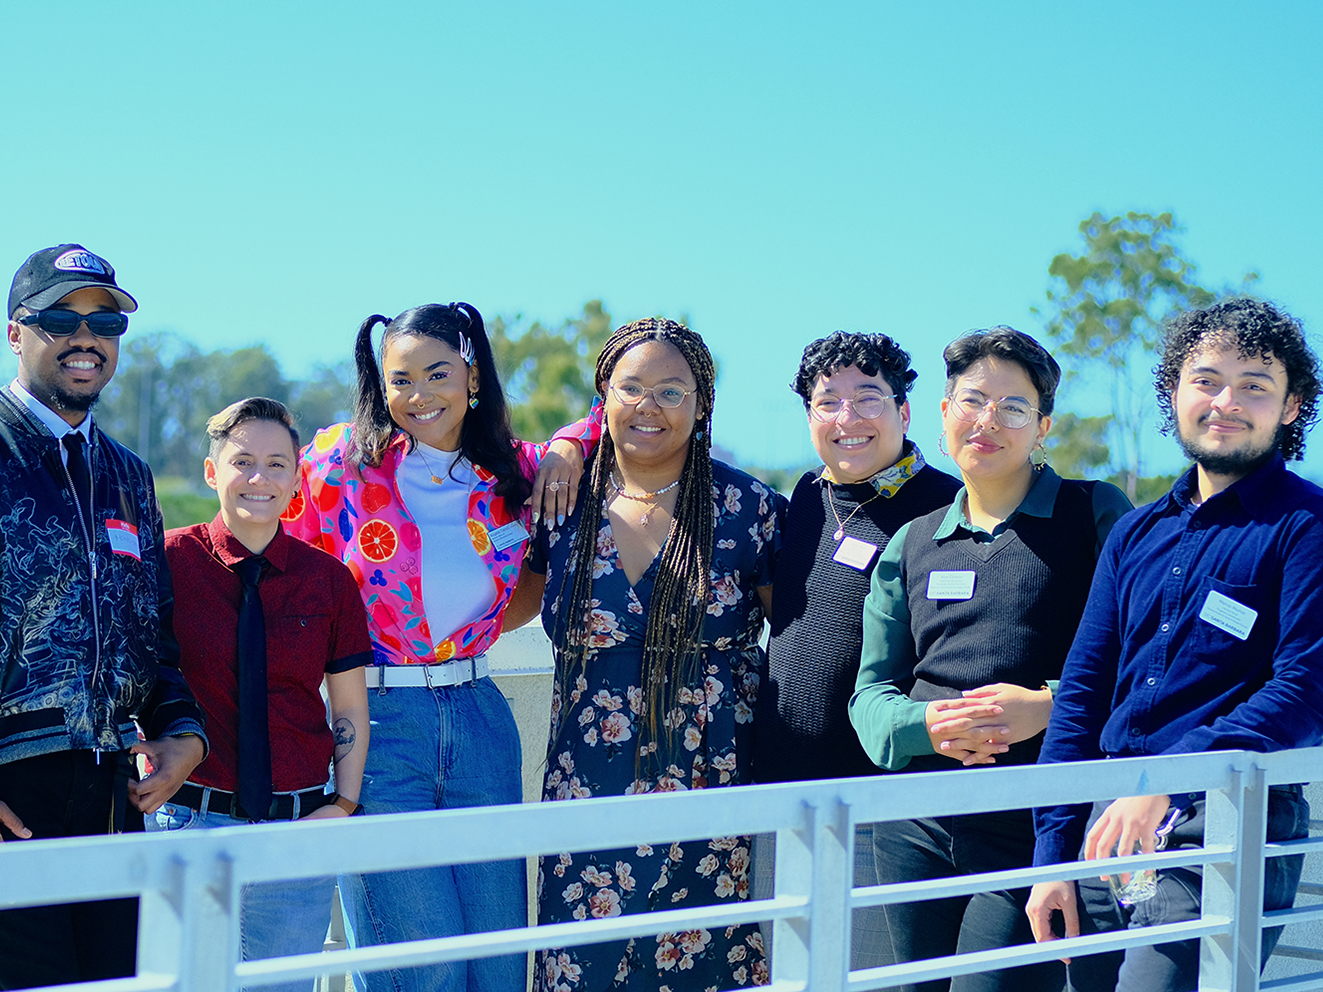 OBSD staff members Mekhi Mitchell, Angela Cantu, and Ashlee Preistley, posing for a group picture with RCSGD staff members Quinn Rioz, Marco Muñoz, Sky Limon, and Alex Elezar during the queer-centered event, Black QTea Party.